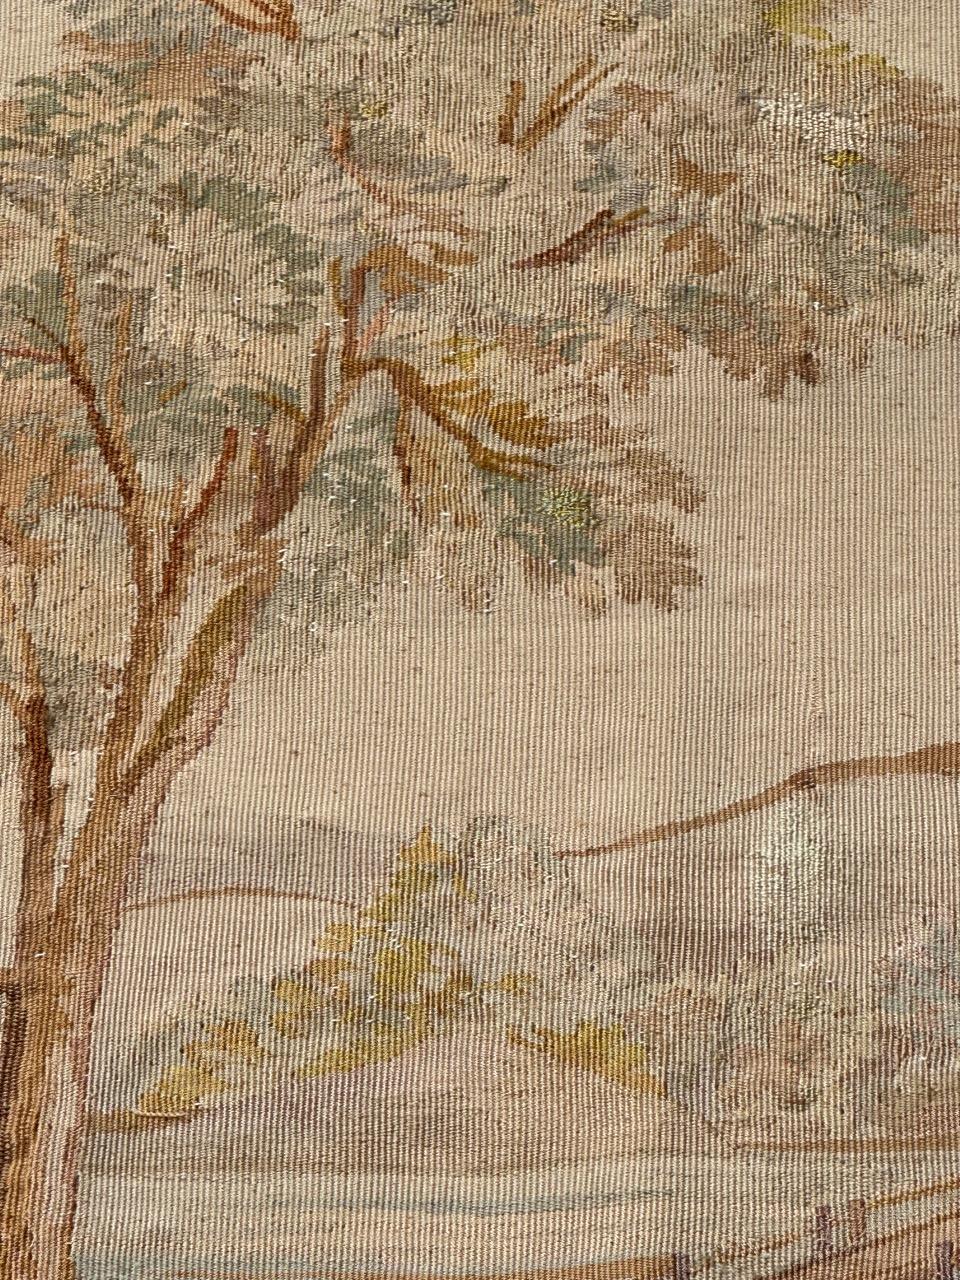 Bobyrug’s Wonderful Fine Antique French Aubusson Tapestry 5